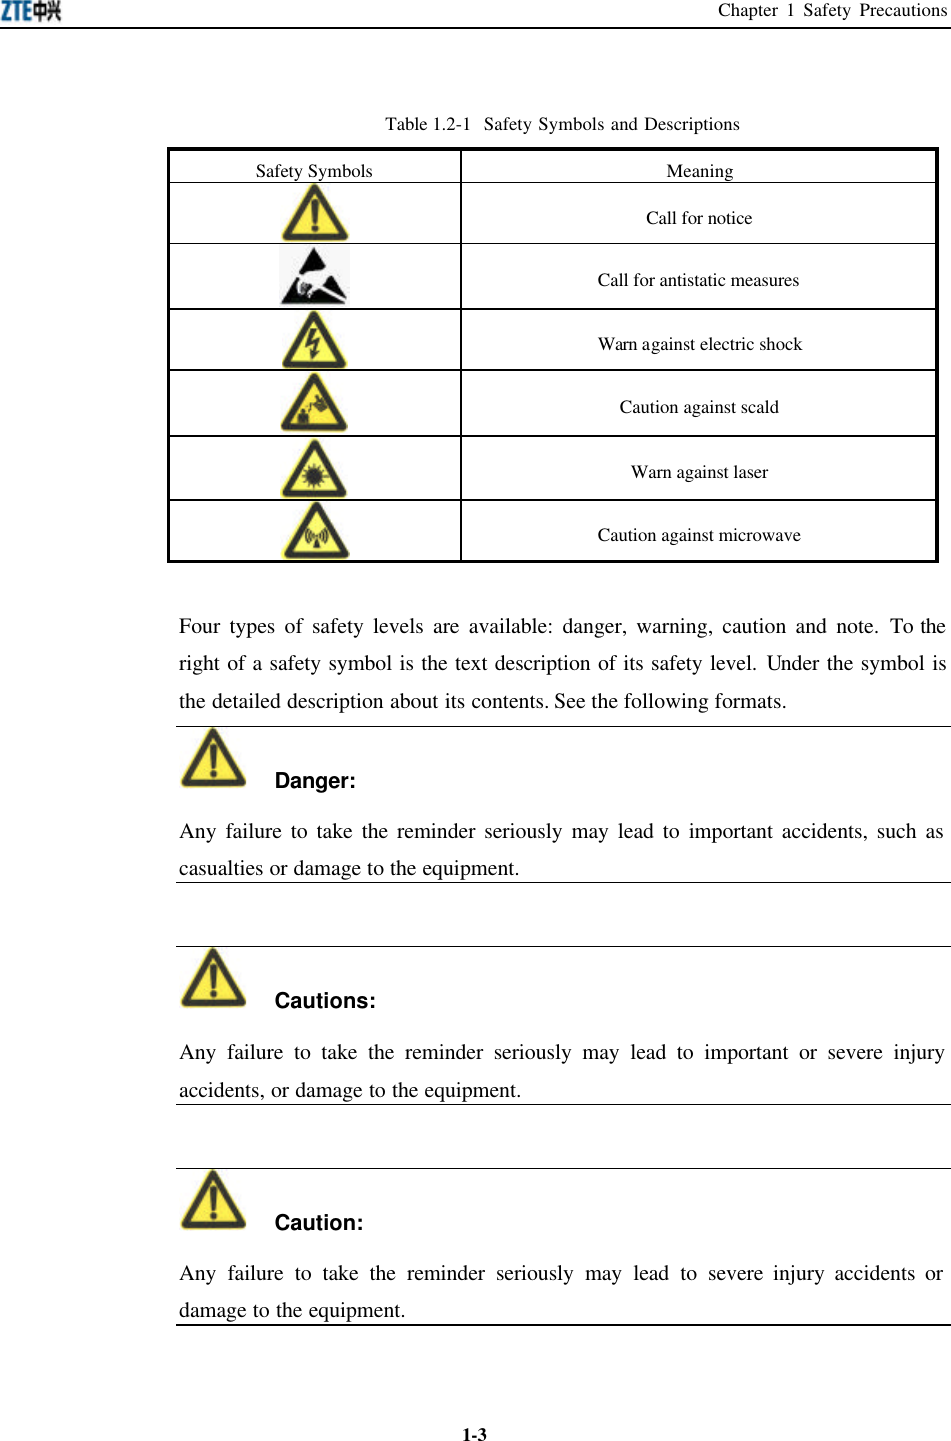 Chapter 1 Safety Precautions  1-3Table 1.2-1  Safety Symbols and Descriptions Safety Symbols Meaning  Call for notice  Call for antistatic measures  Warn against electric shock  Caution against scald  Warn against laser  Caution against microwave Four types of safety levels are available: danger, warning, caution and note. To the right of a safety symbol is the text description of its safety level. Under the symbol is the detailed description about its contents. See the following formats.   Danger:   Any failure to take the reminder seriously may lead to important accidents, such as casualties or damage to the equipment.    Cautions: Any failure to take the reminder seriously may lead to important or severe injury accidents, or damage to the equipment.    Caution: Any failure to take the reminder seriously may lead to severe injury accidents or damage to the equipment.  